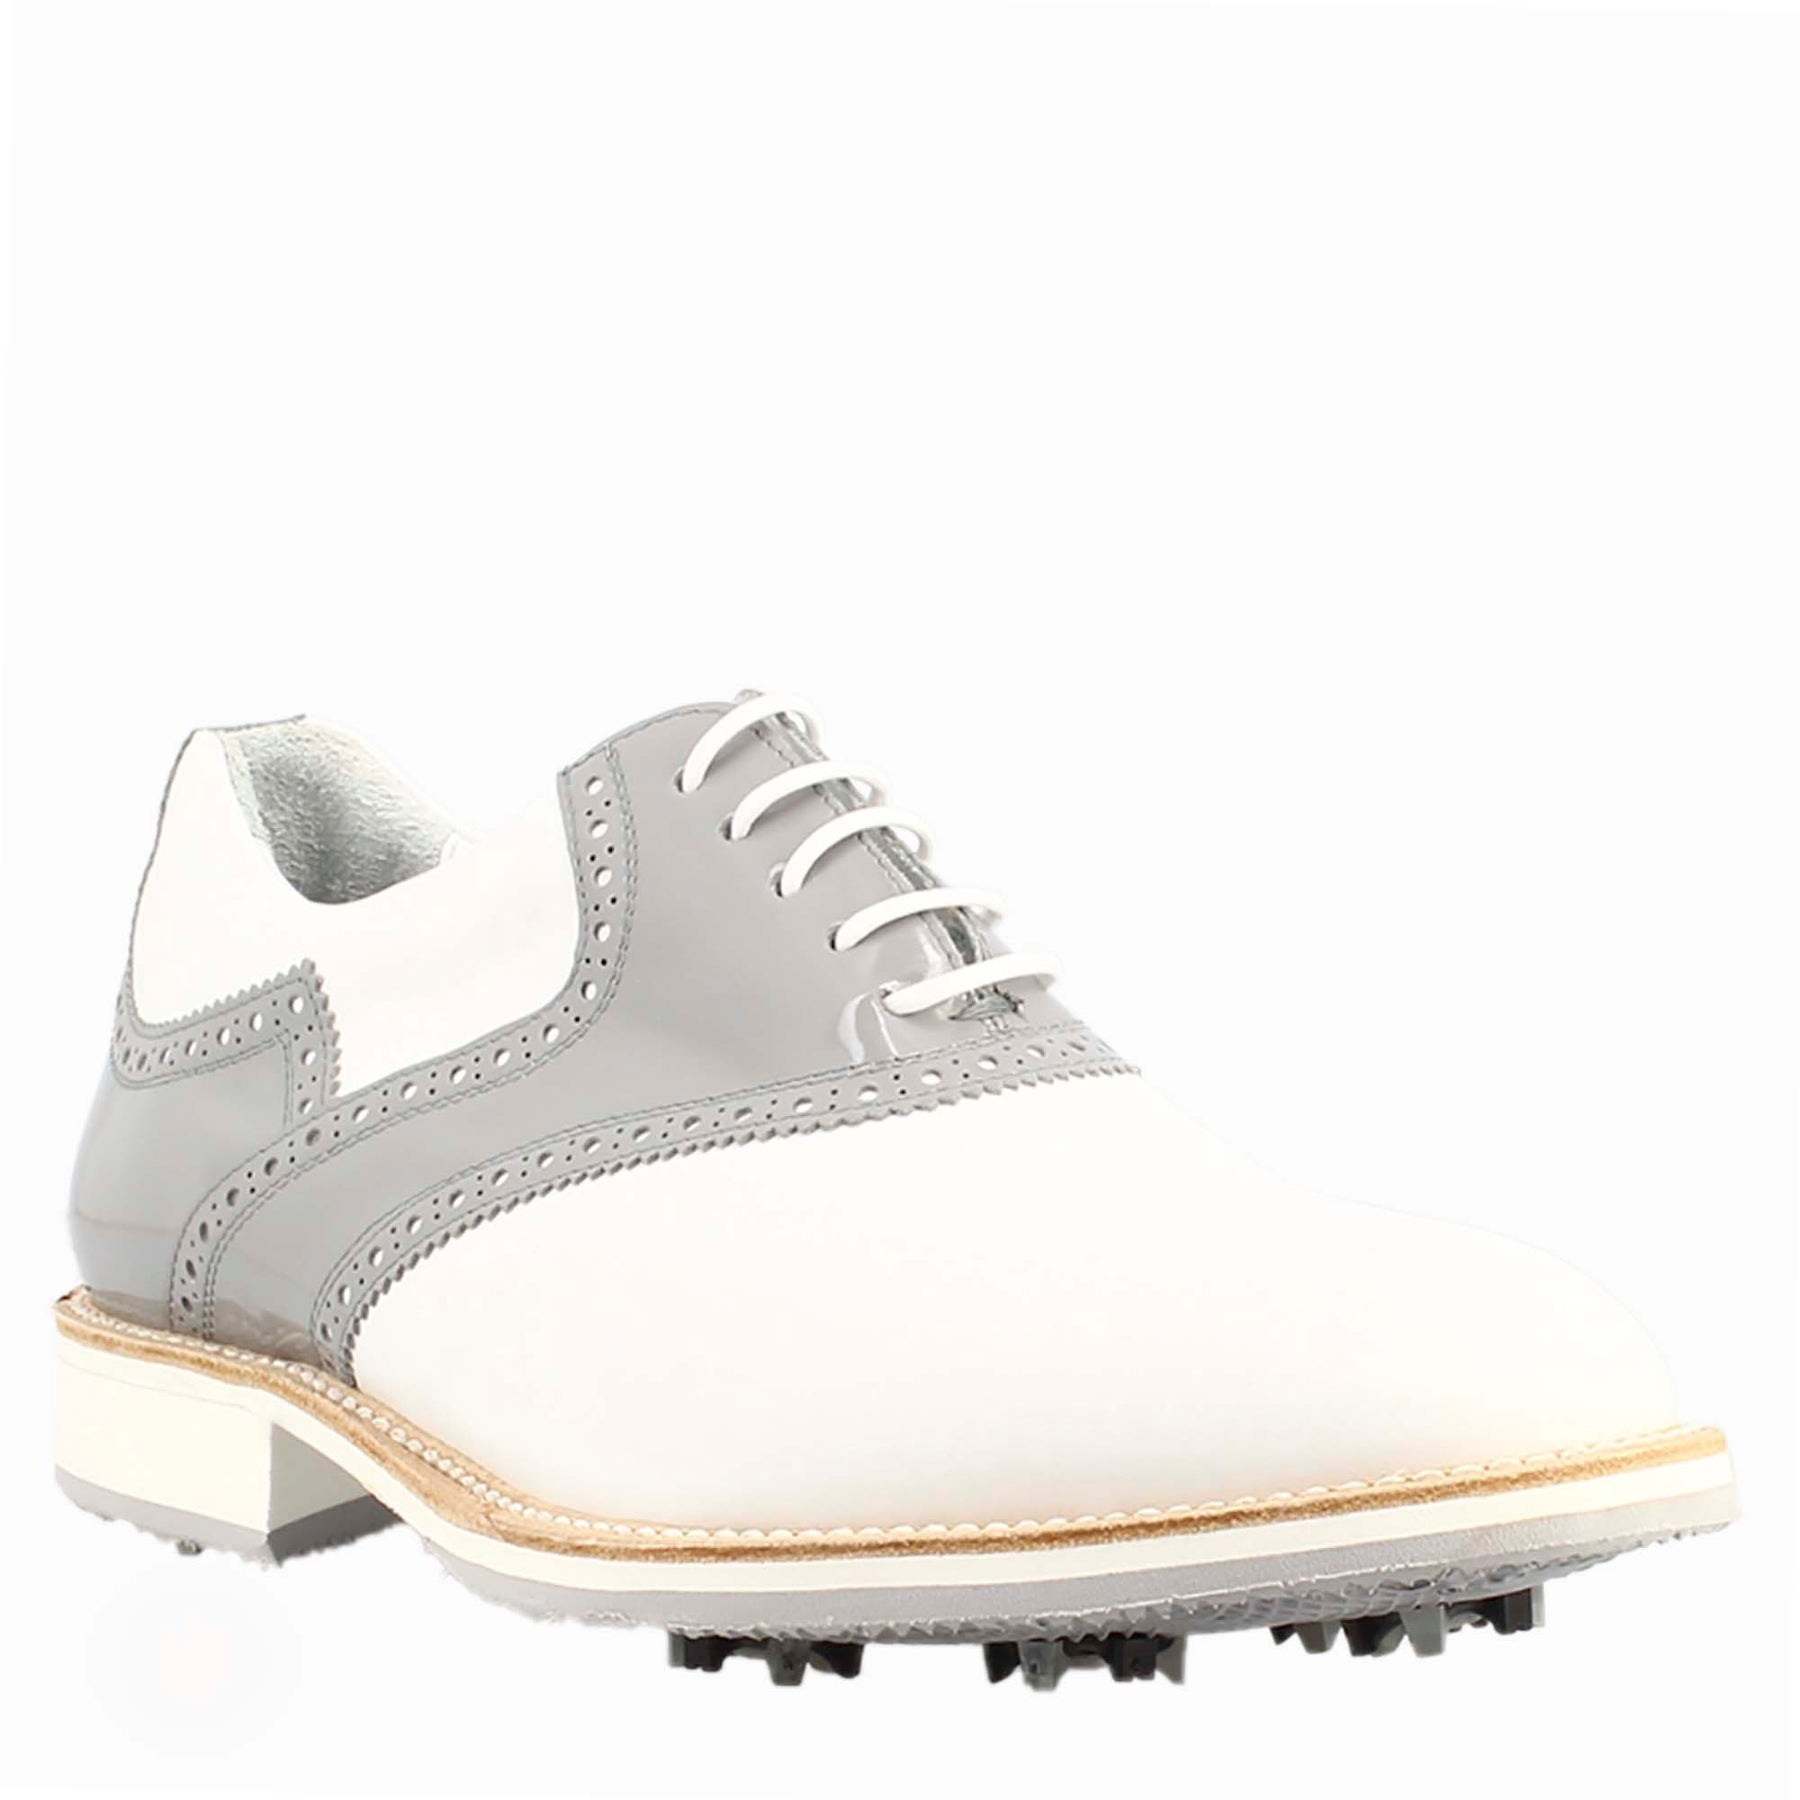 Women's golf shoes in white and grey leather handcrafted brogue details